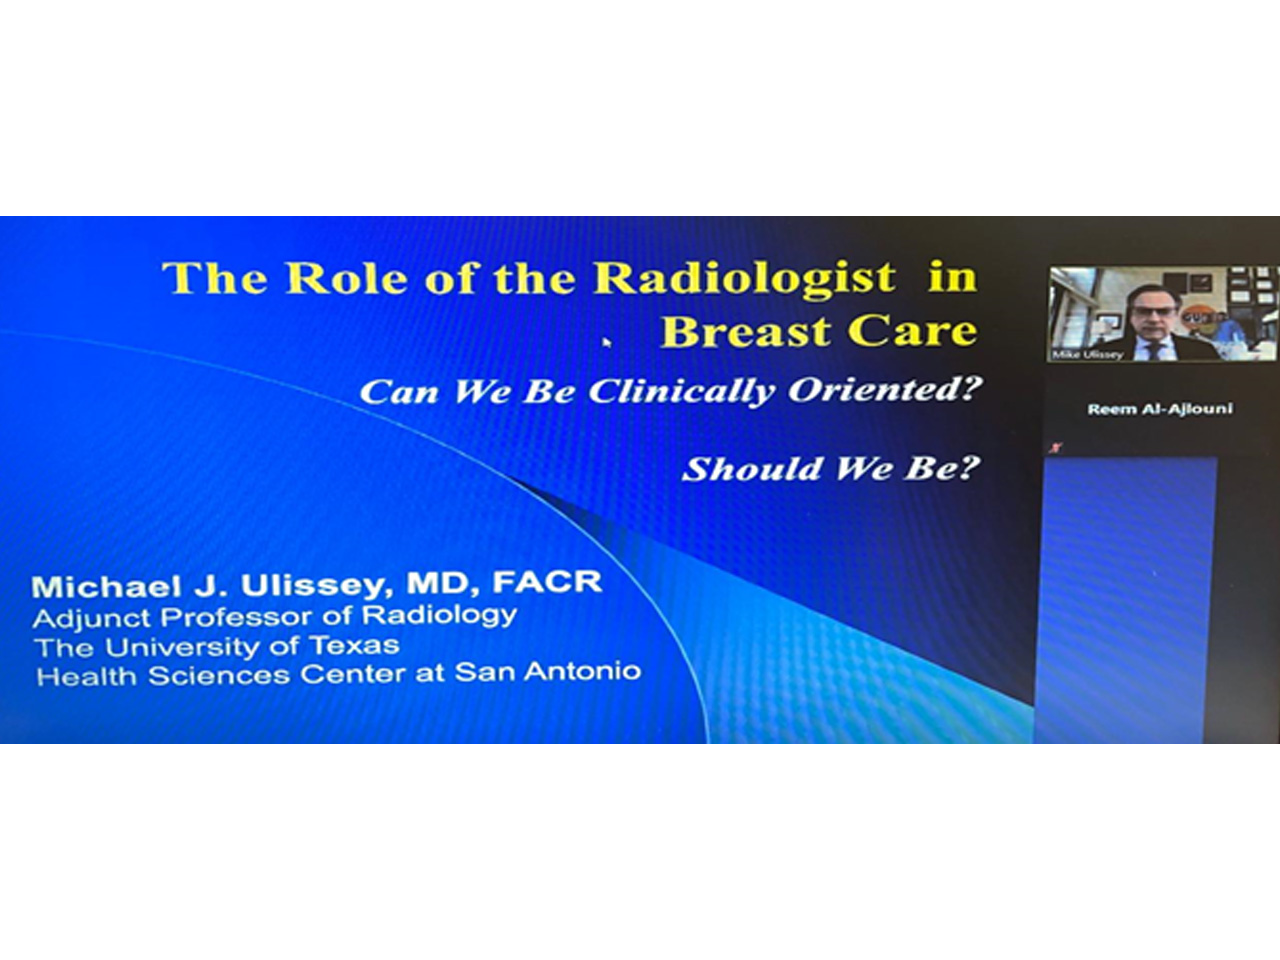 The Role of the Radiologist in Breast Care Webinar